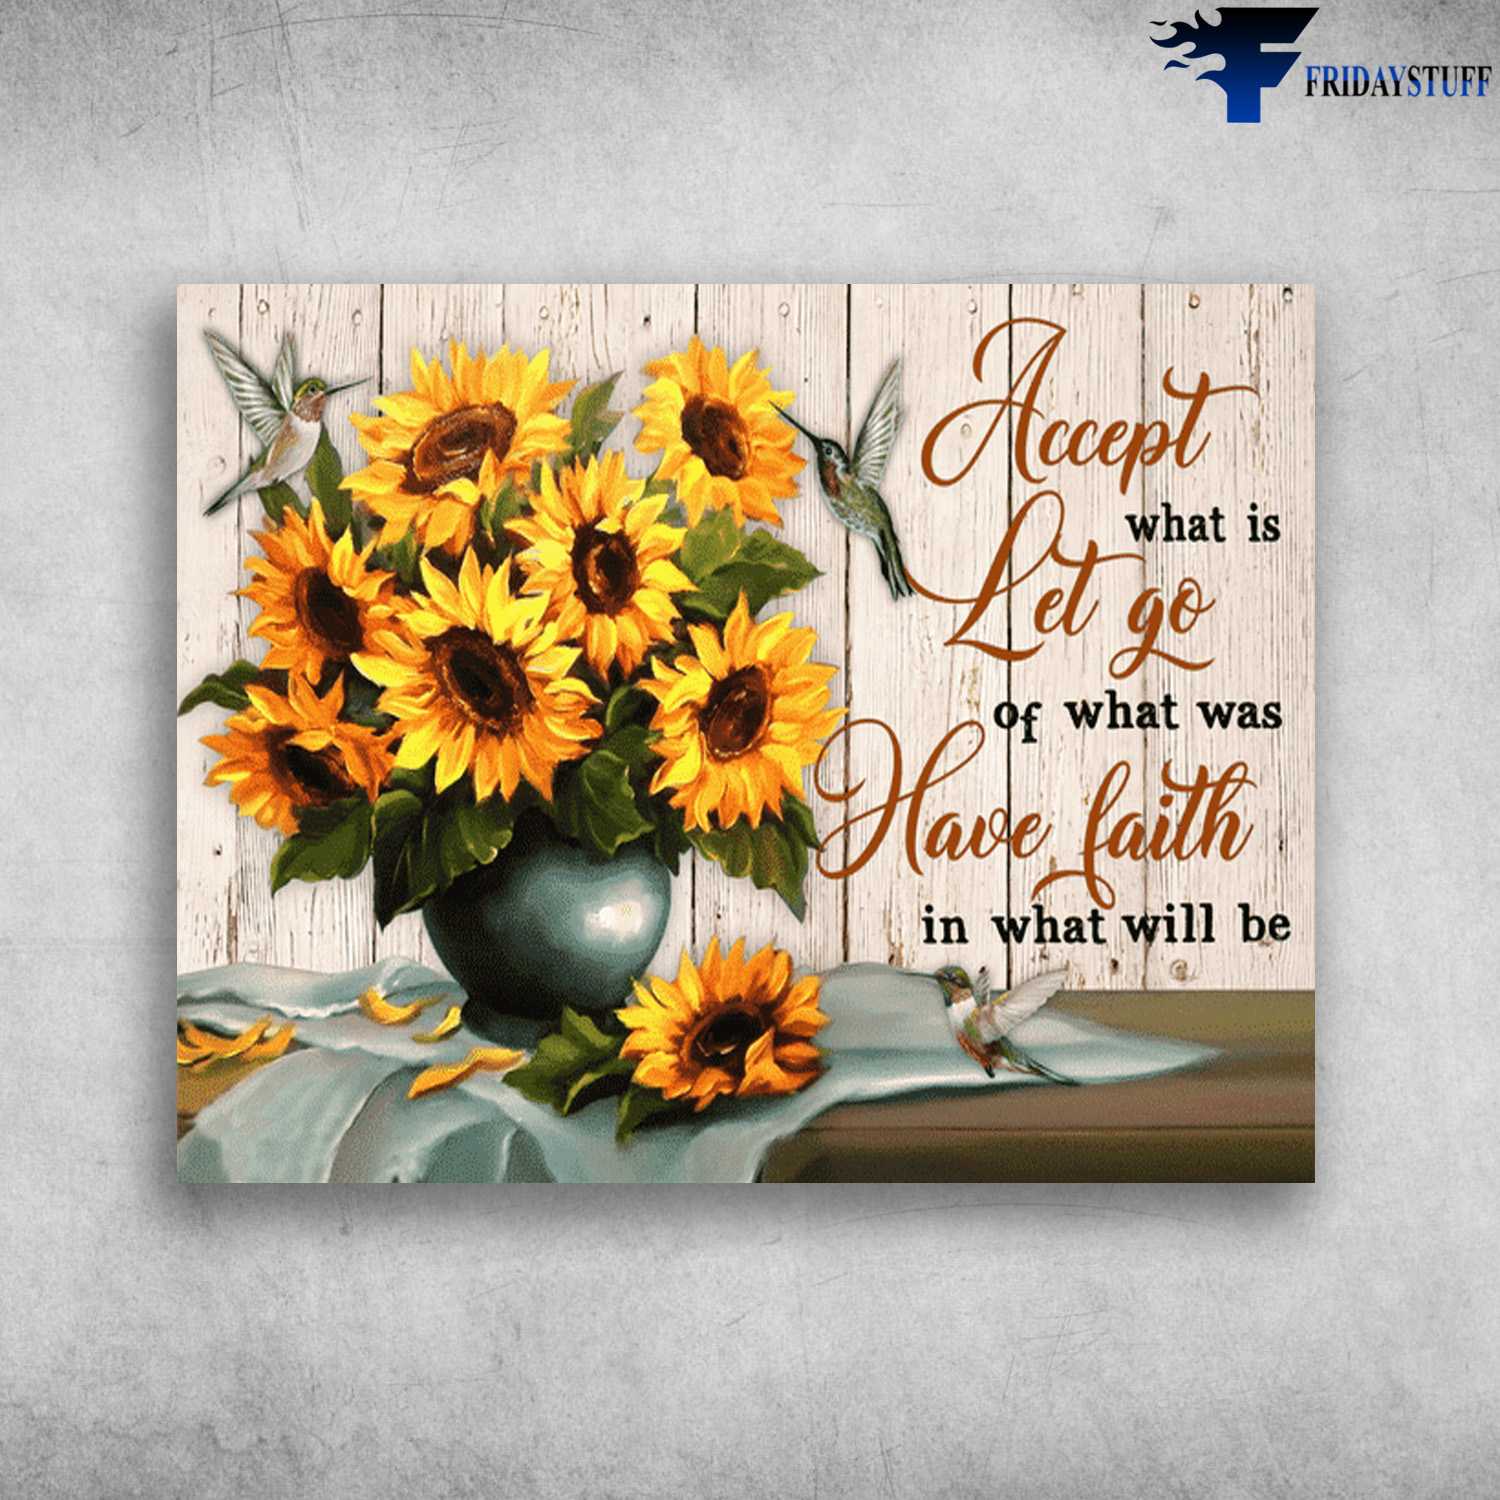 Hummingbird Poster, Sunflower Decor, Accept What Is, Let Go Of What Was, Have Faith In What Will Be